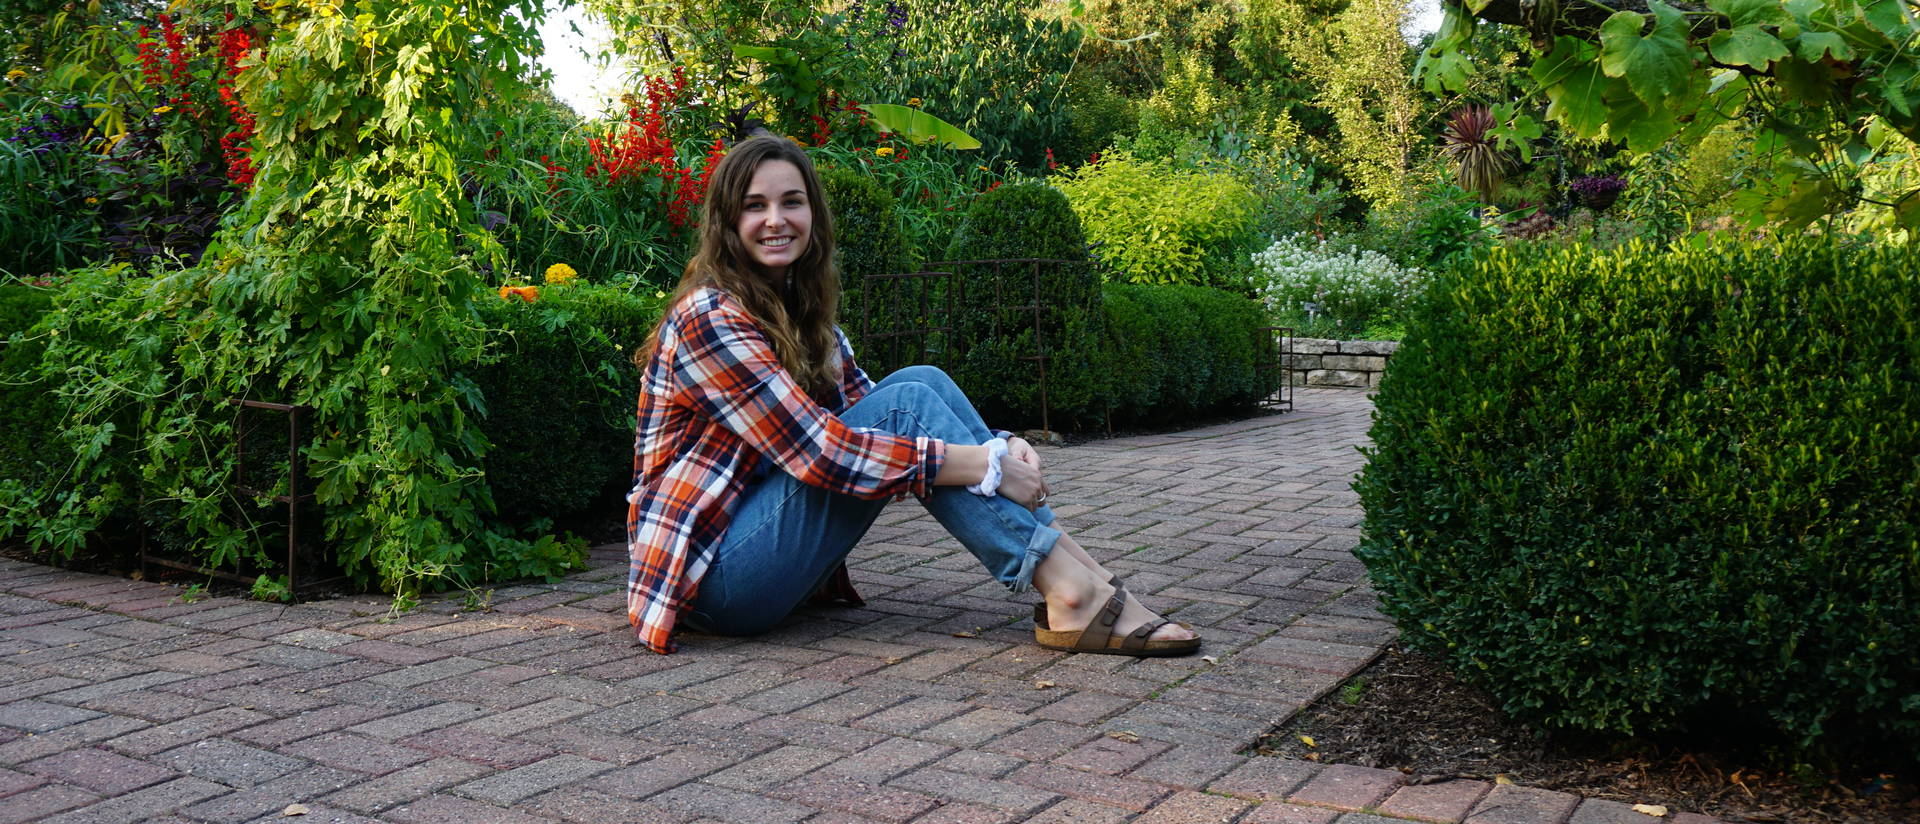 Lucy Hobbs found opportunities to bring together her nursing and Spanish majors through research, study abroad and other experiences during her years as a Blugold. The May graduate says those experiences are shaping how she sees her future in health care.